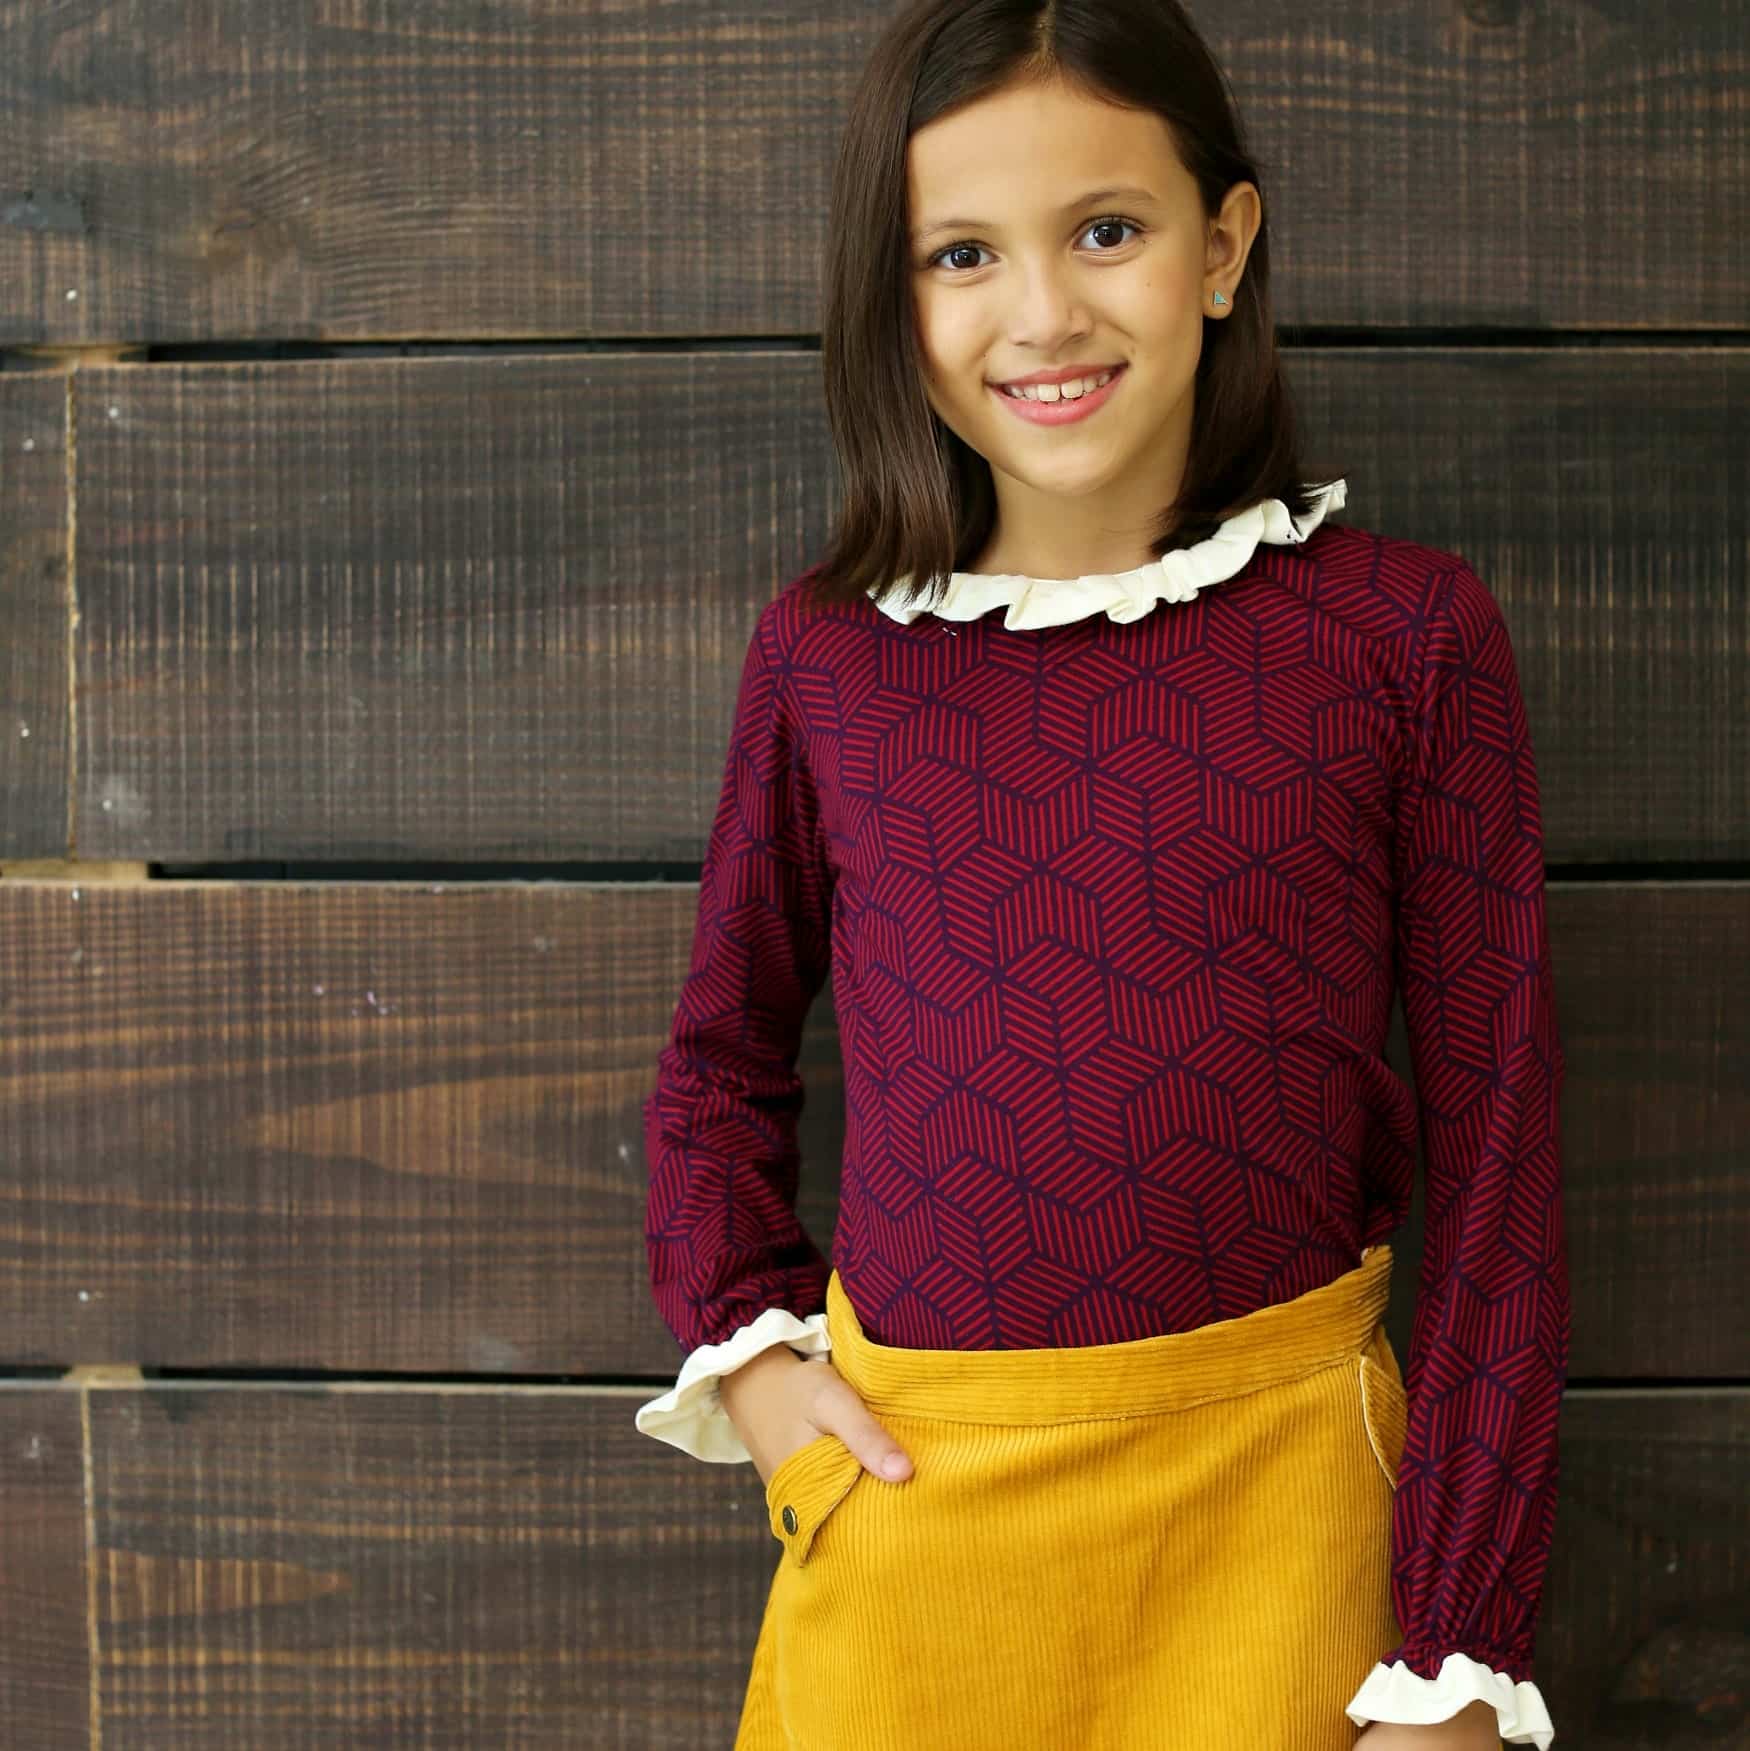 burgundy cotton jersey t-shirt with navy blue graphic print, off-white frilly collar, long sleeves from the children's fashion brand la faute a voltaire